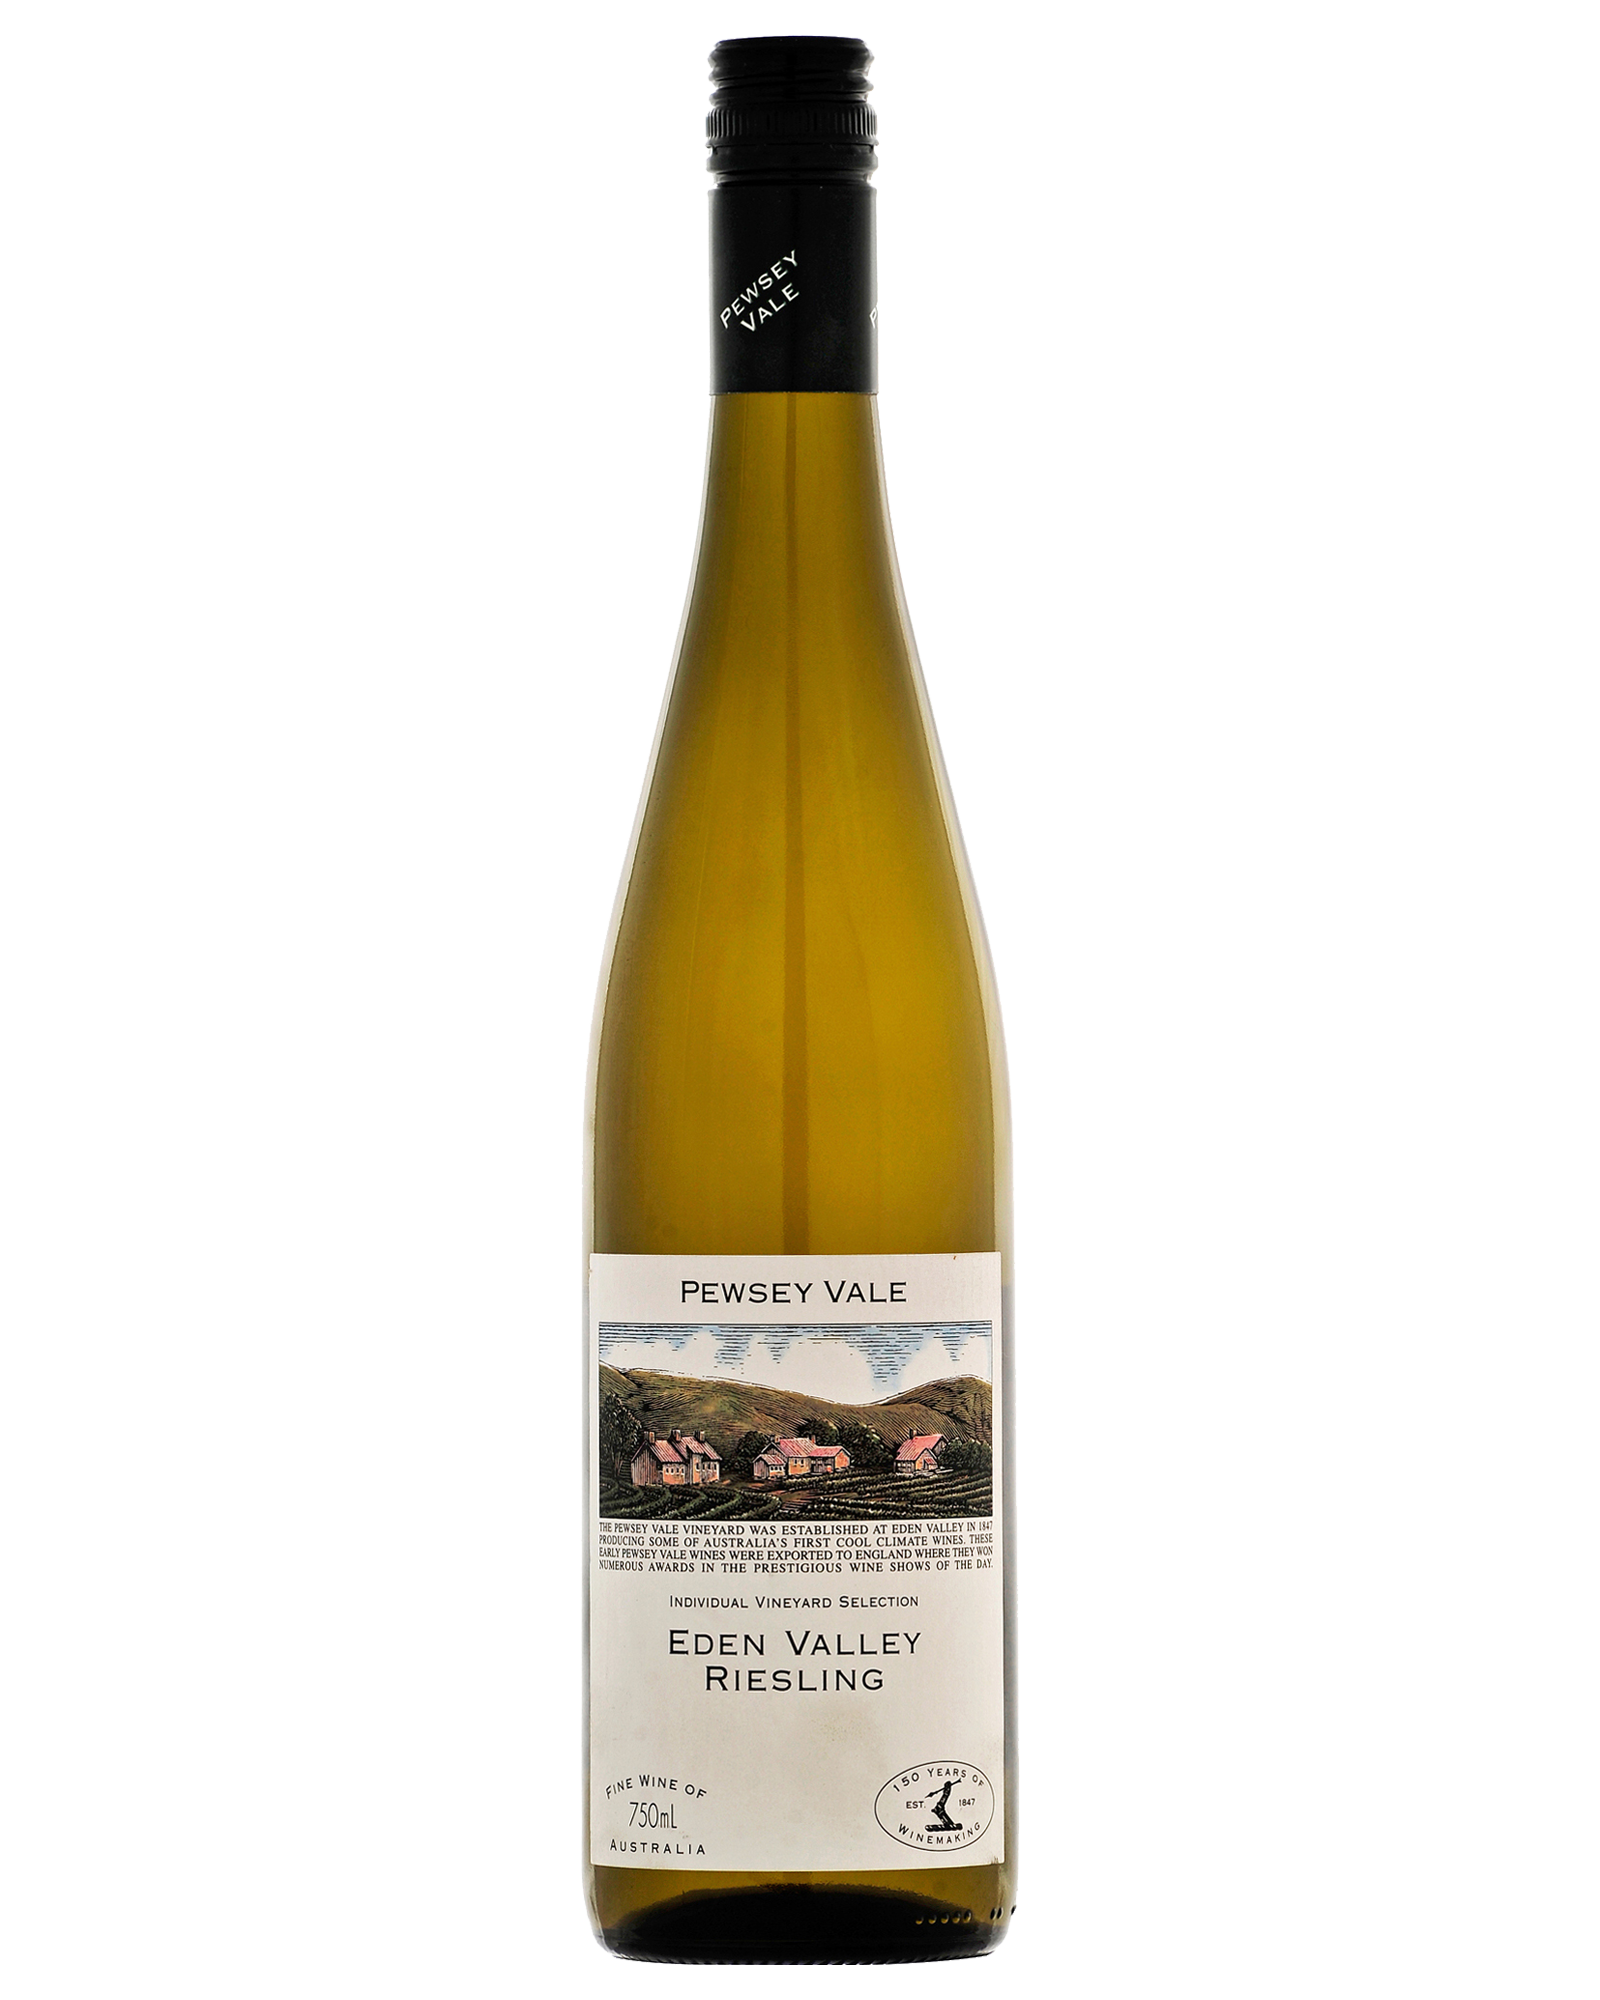 Pewsey Vale Eden Valley Riesling 2007